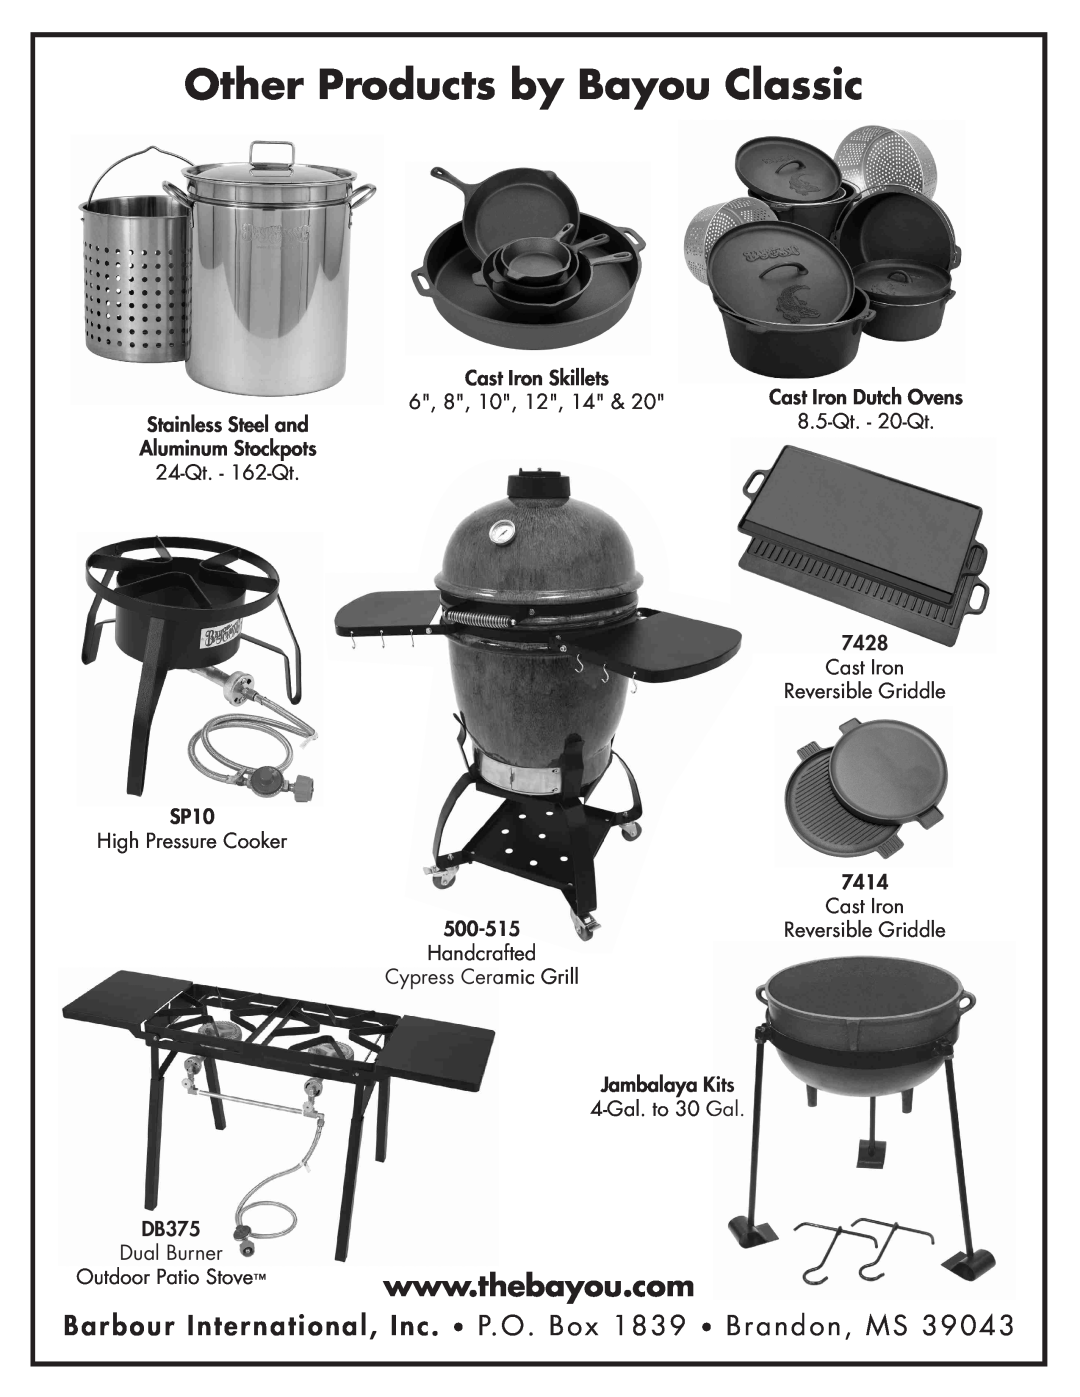 Bayou Classic 700-701 manual Barbour International, Inc. P.O. Box 1839 Brandon, MS, Other Products by Bayou Classic 